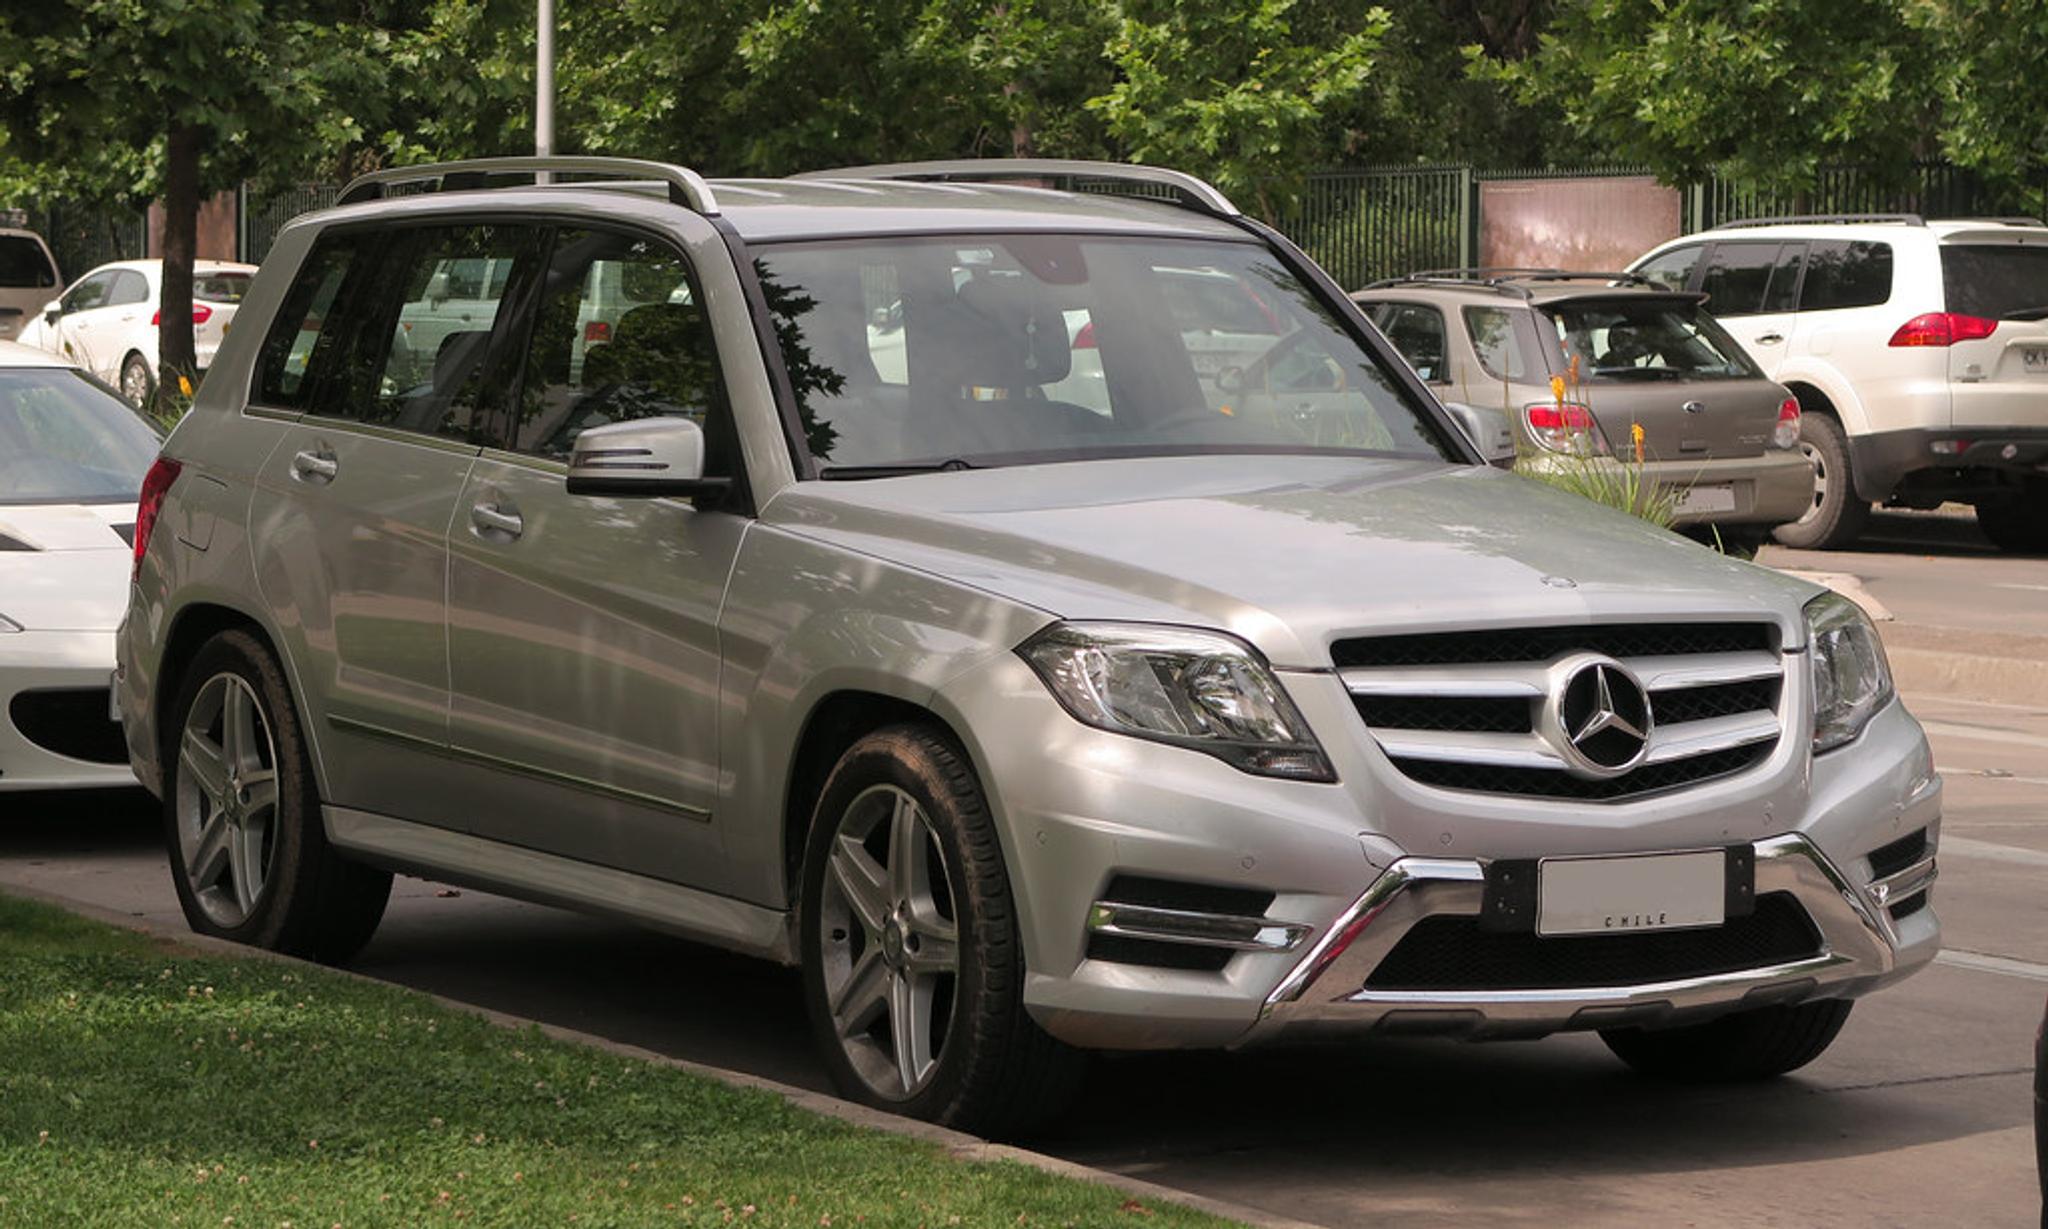 Silver Mercedes GLK parked on the side of the road